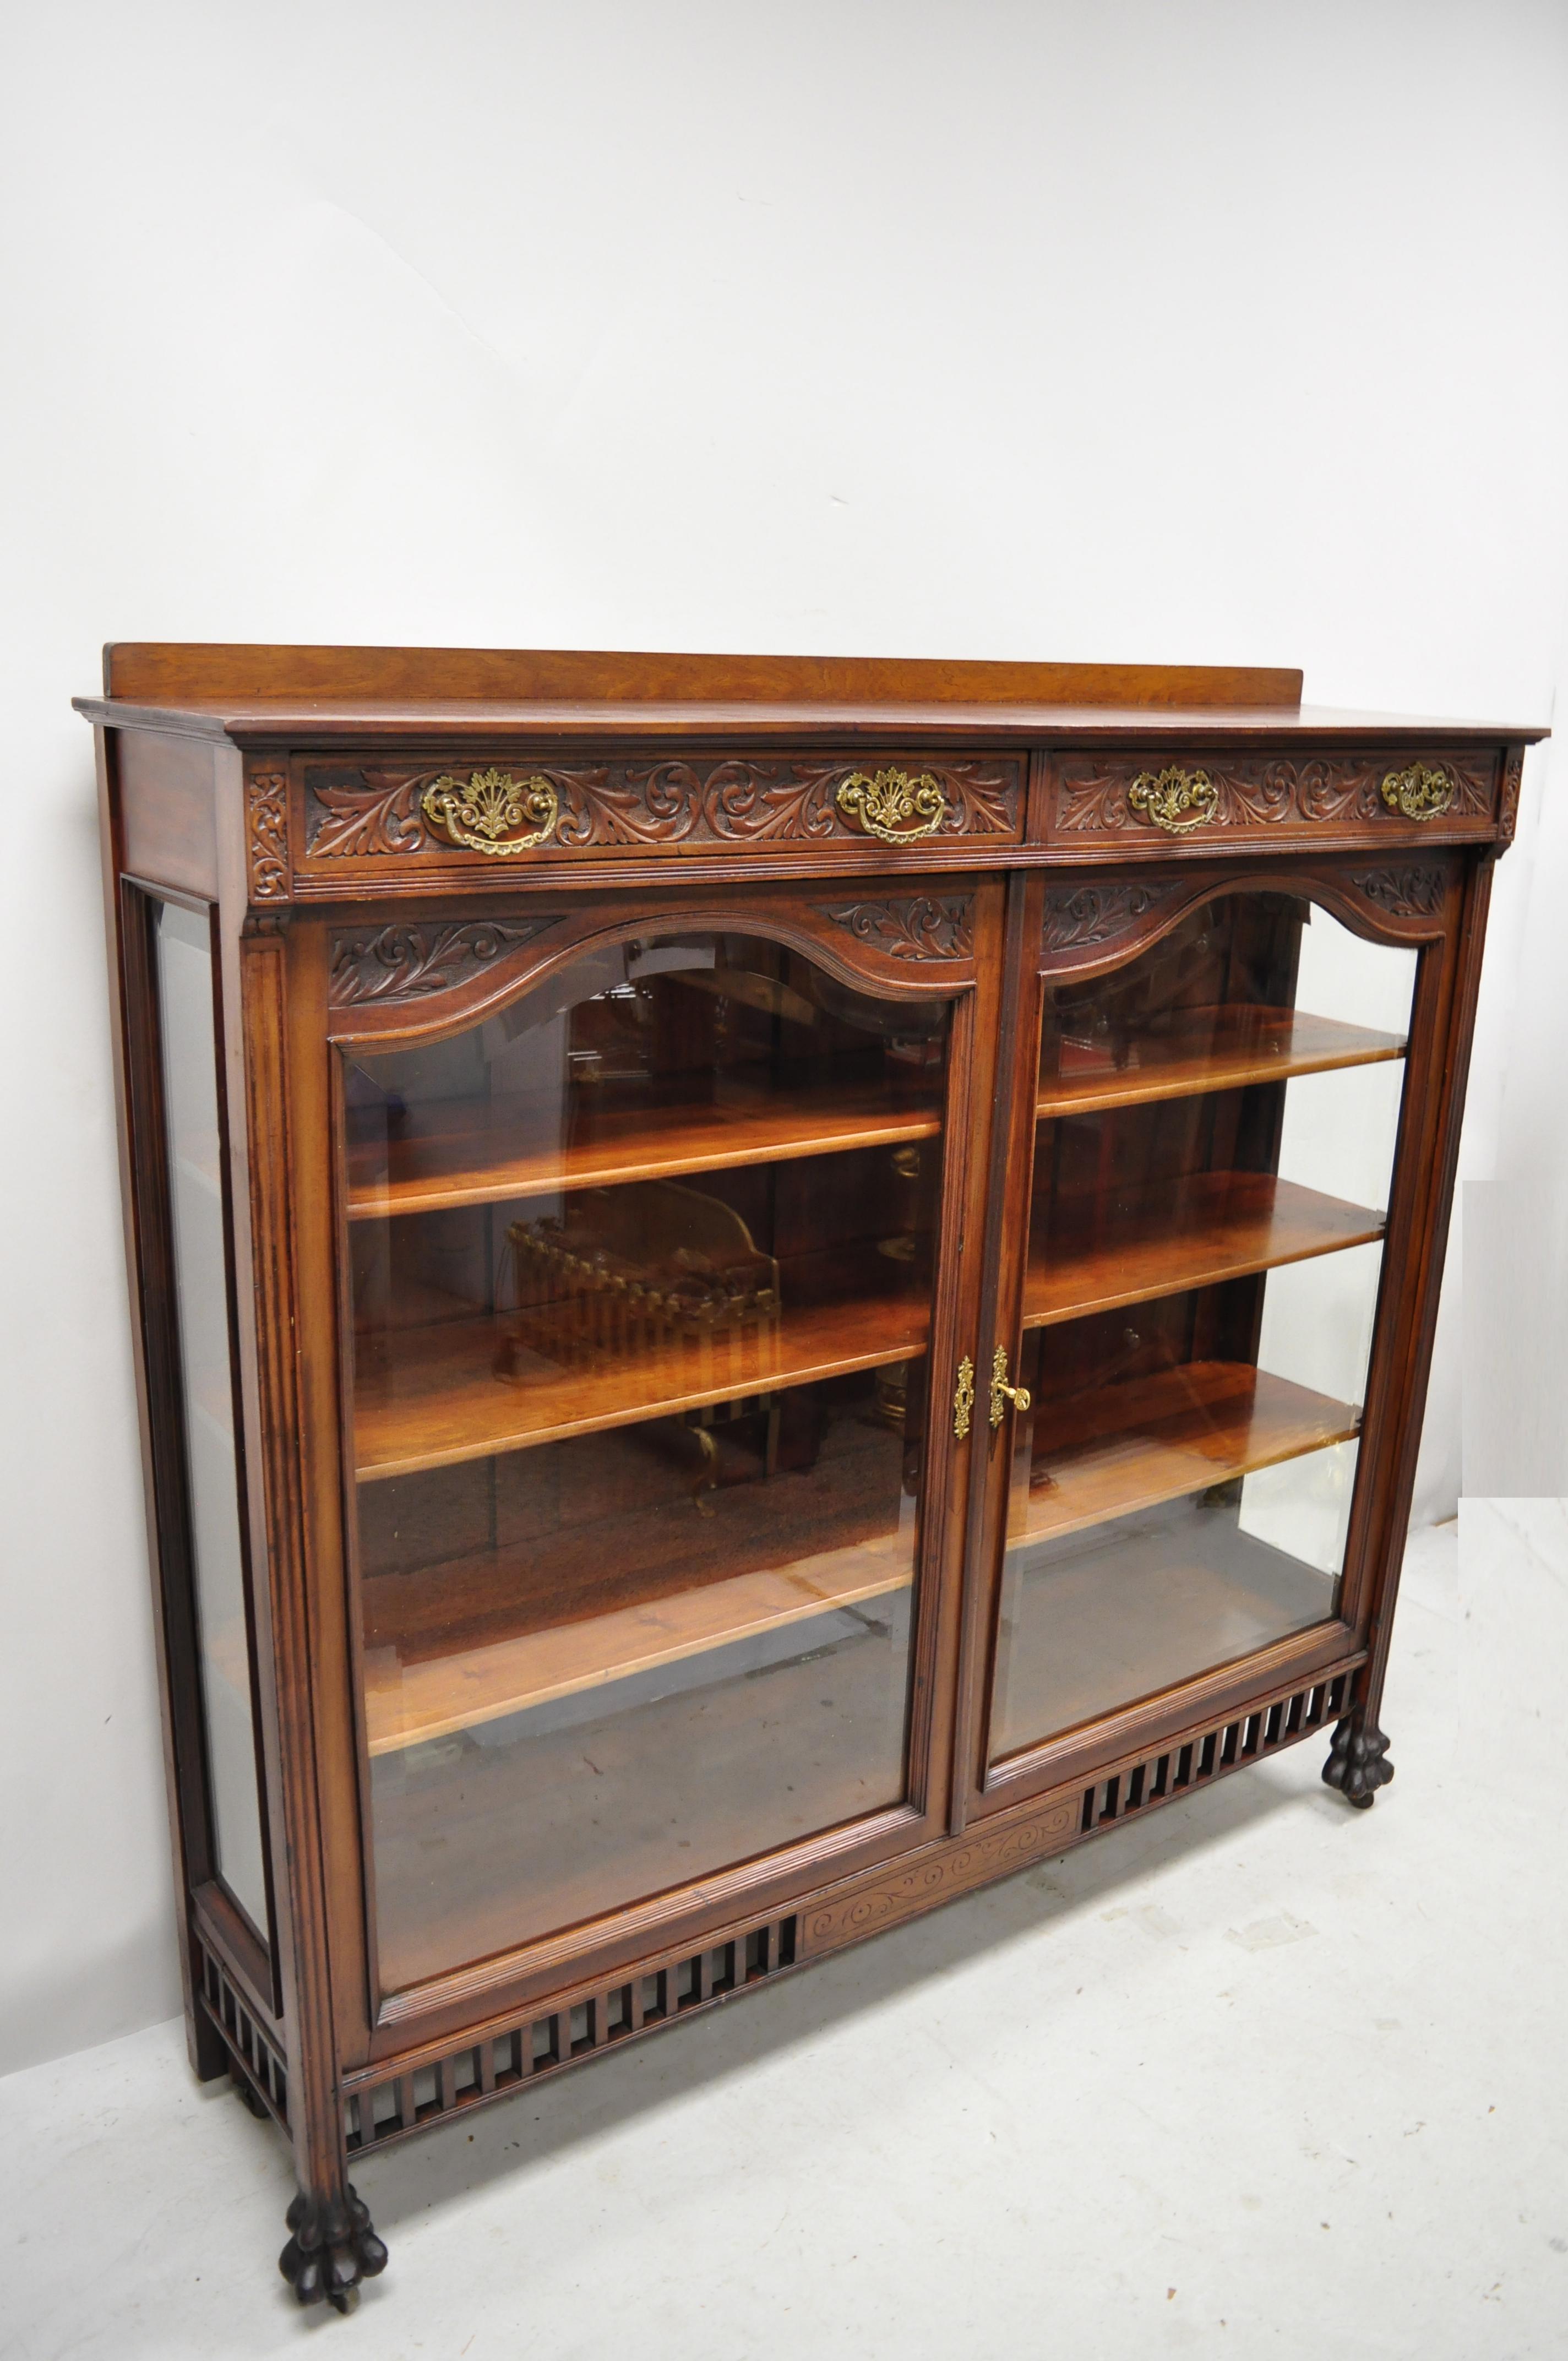 Antique American Victorian paw feet carved mahogany China cabinet bookcase curio with 2 drawers. Item features beautiful wood grain, nicely carved details, 2 beveled glass swing doors, 2 dovetailed drawers, 3 wooden shelves, carved paw feet, very